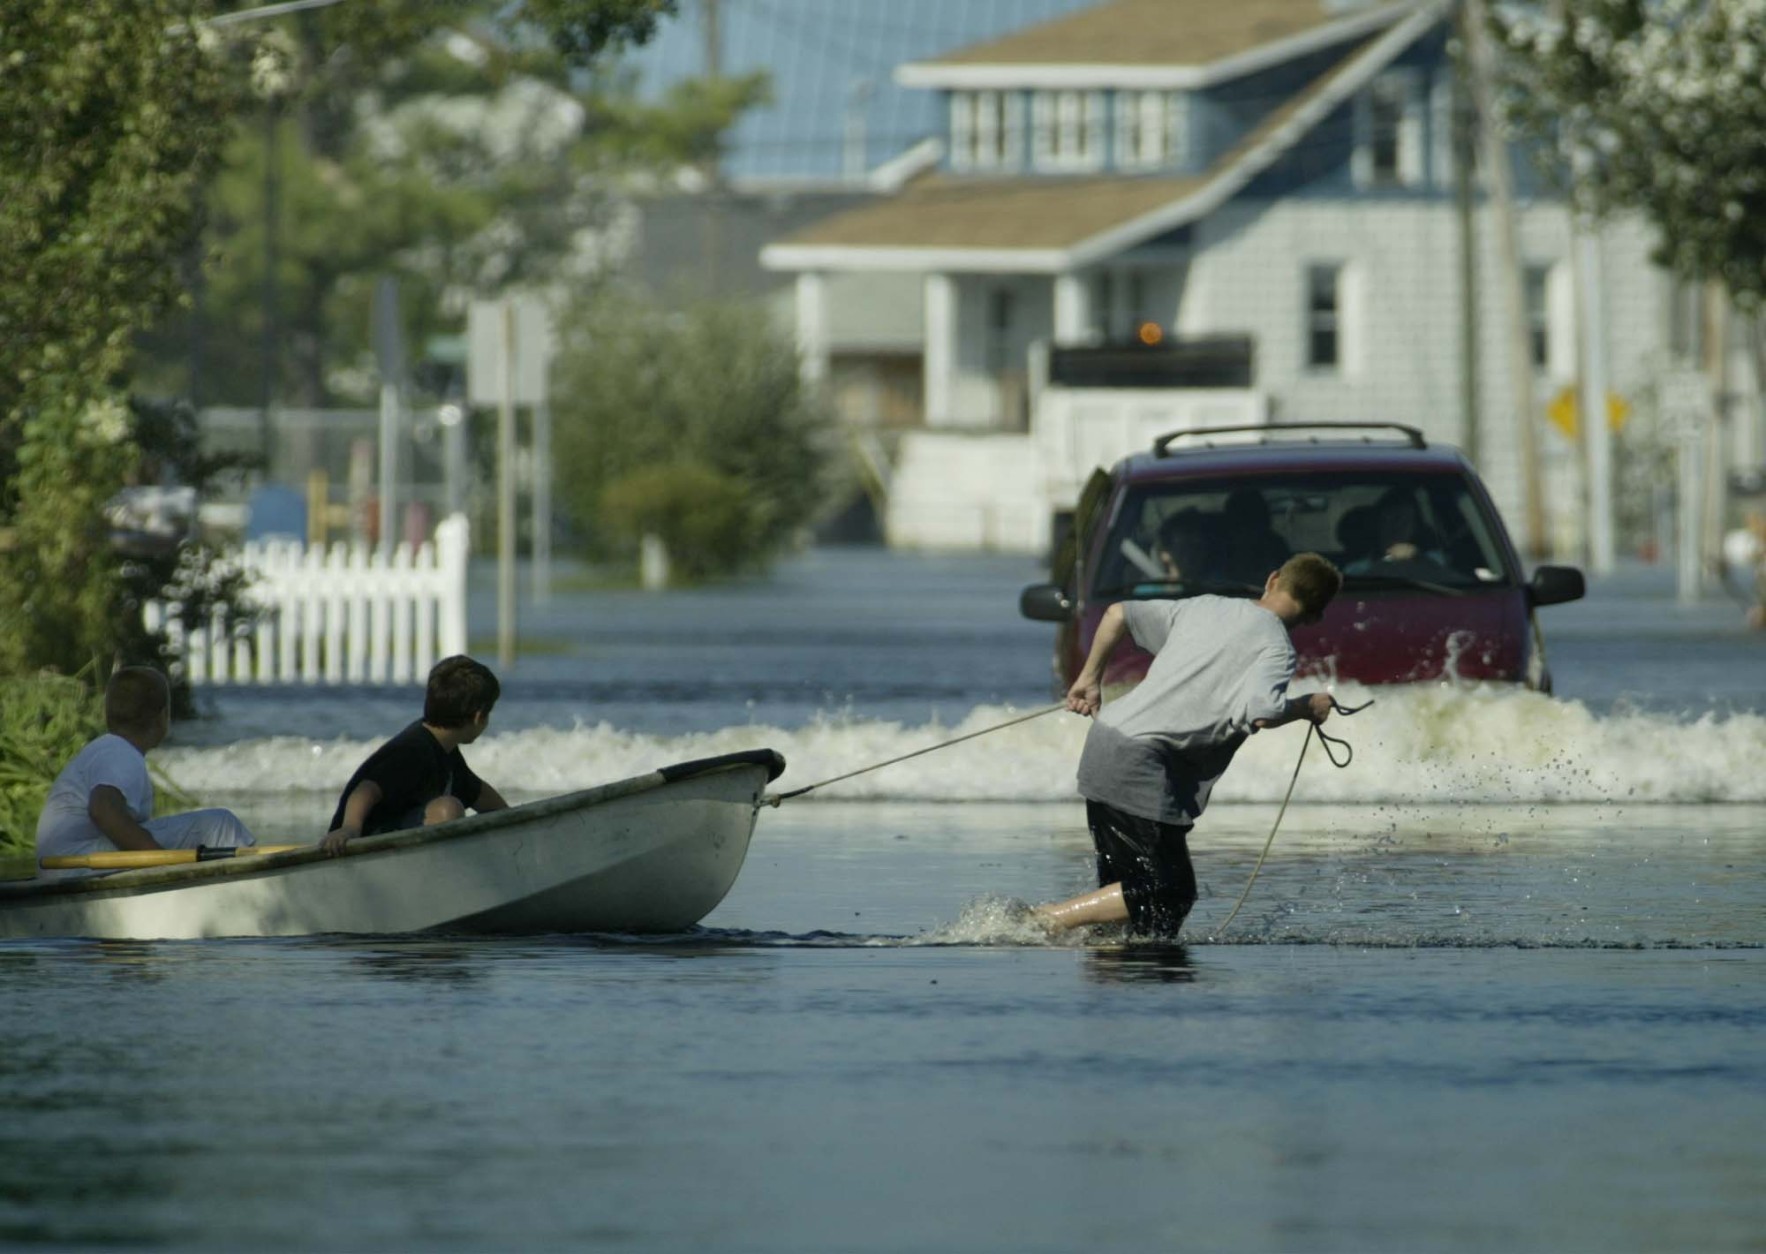 Children pull a boat in front of a water-plowing car in a street in Crisfield, Md., Friday, Sept. 19, 2003, where streets were flooded following Hurricane Isabel. (AP Photo/George Widman)